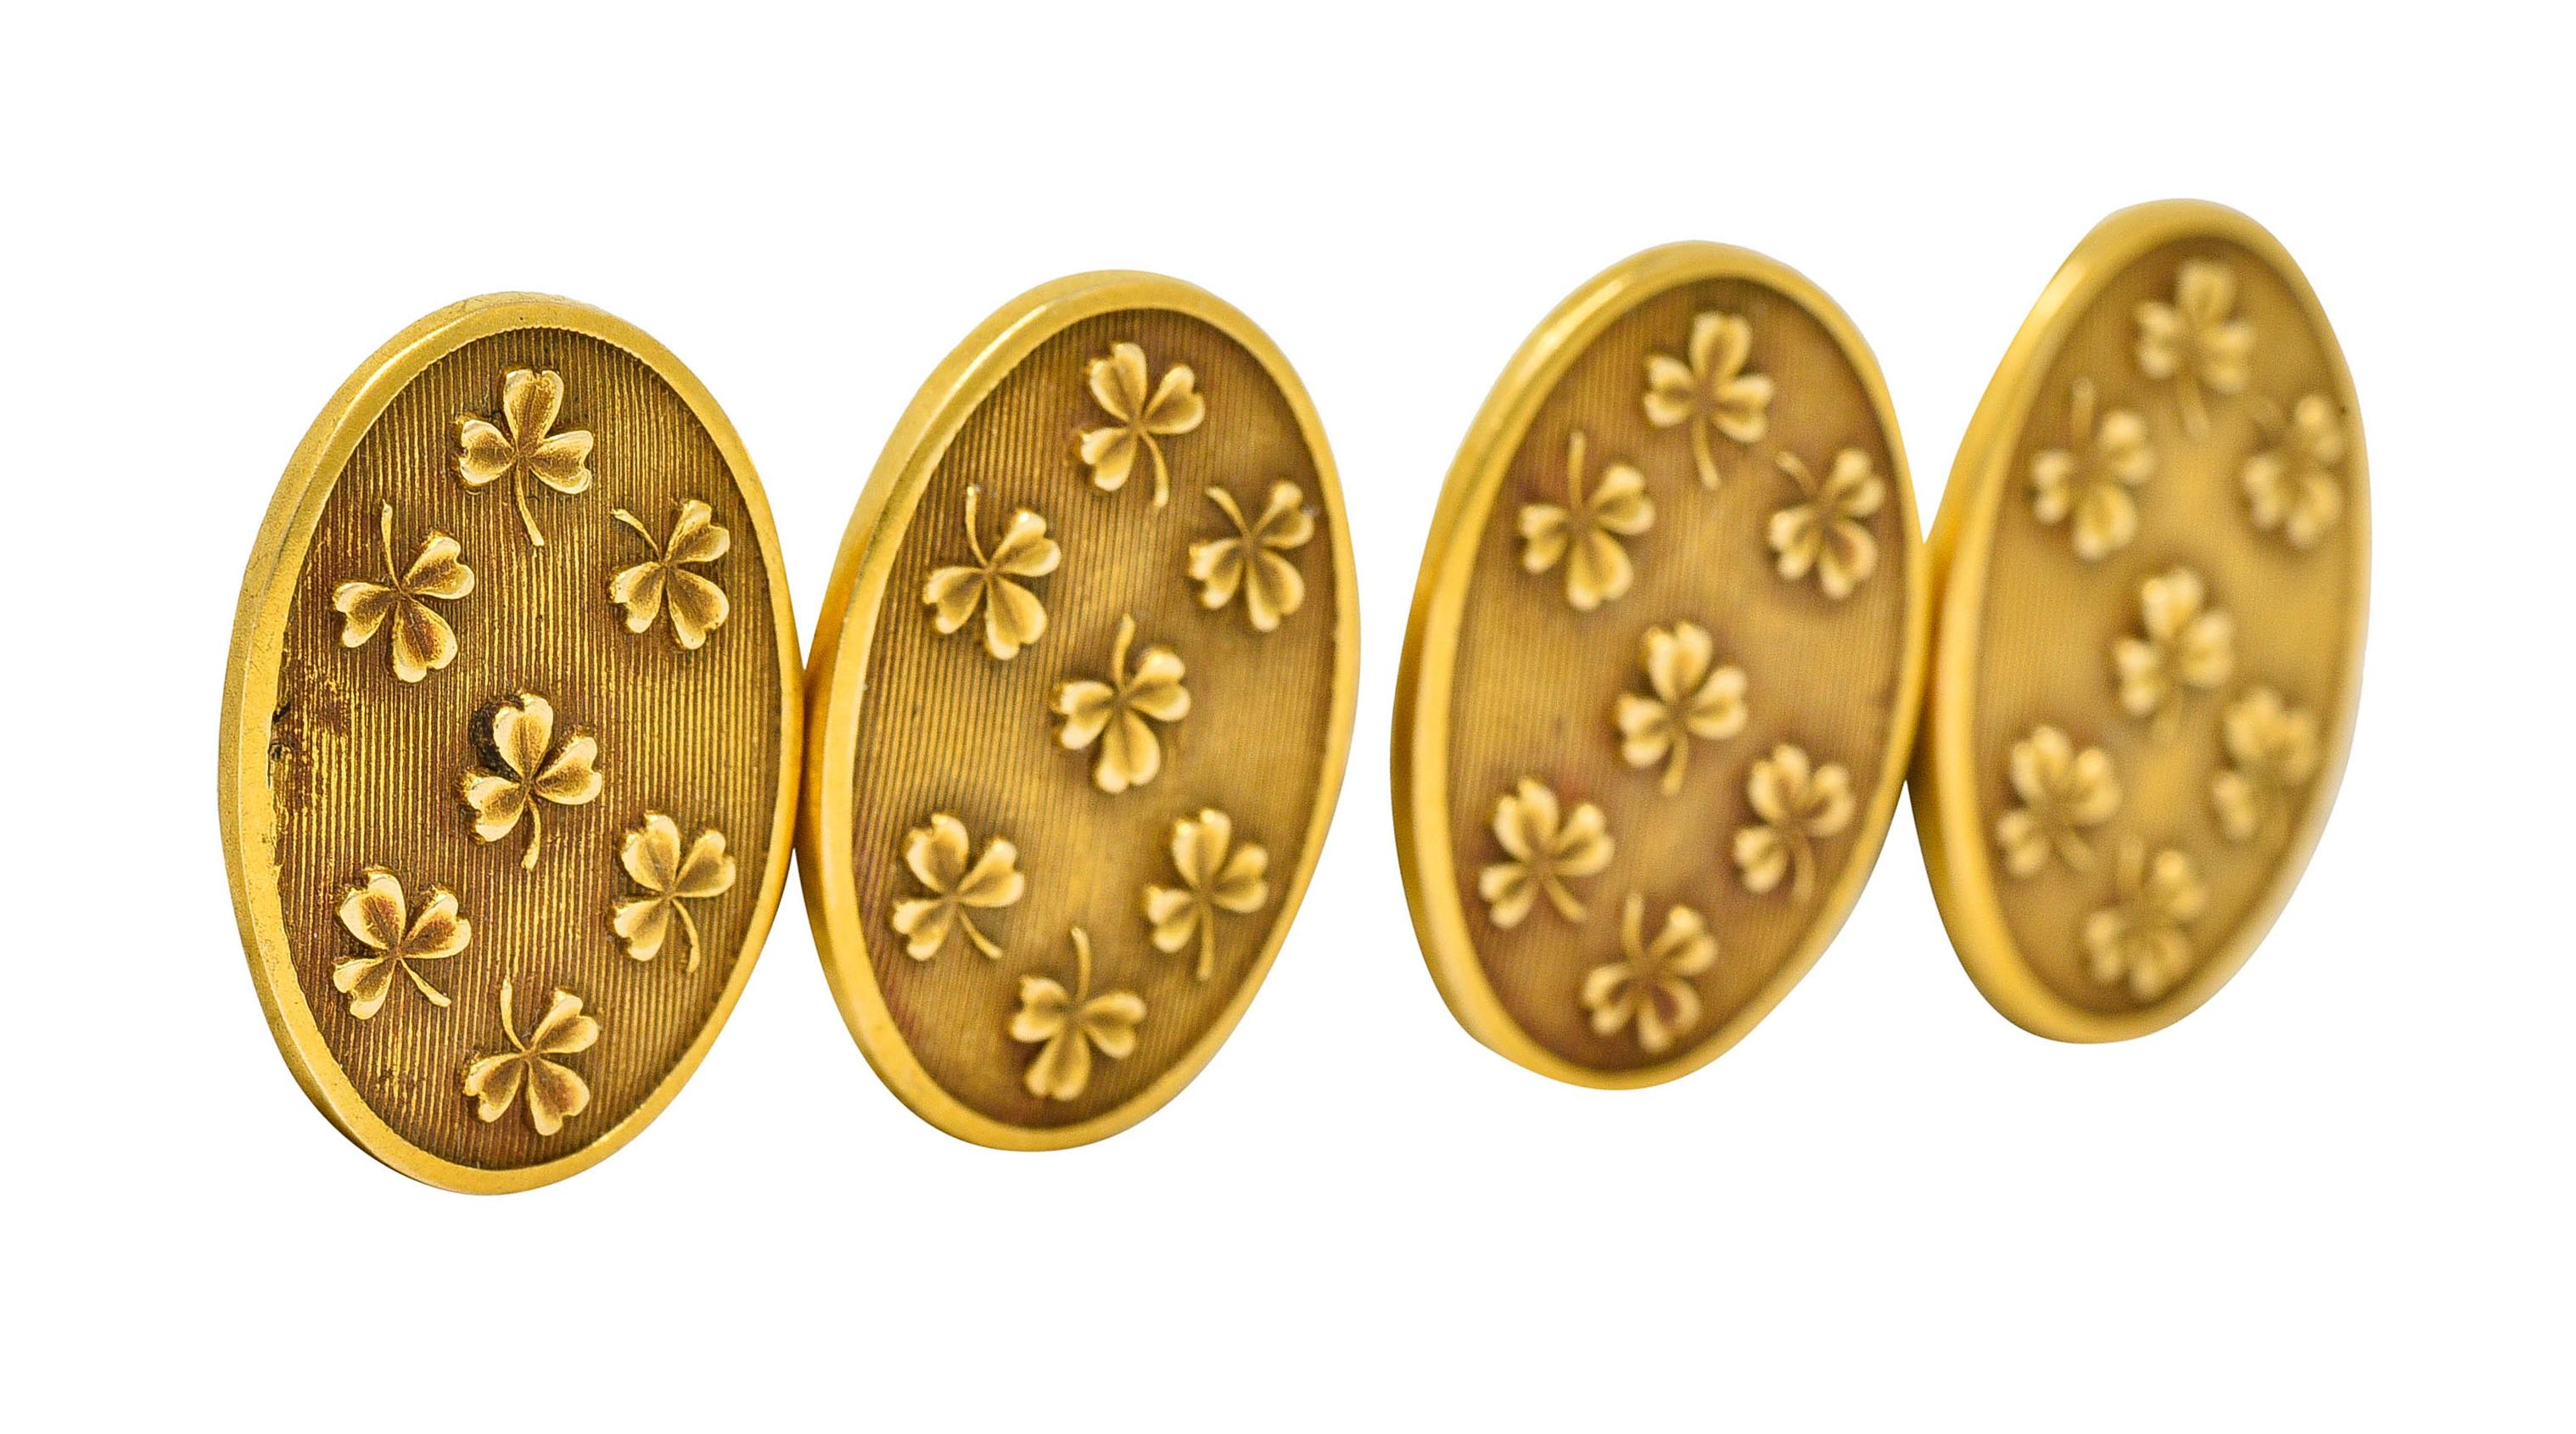 Link style cufflinks terminate as ovals with a deeply ribbed texture

Emblazoned with fanciful and highly rendered clovers

With maker's mark and stamped 14K for 14 karat gold

Circa: 1905

Length: 7/8 inch

Oval measures: 1/2 x 3/4 inch

Total